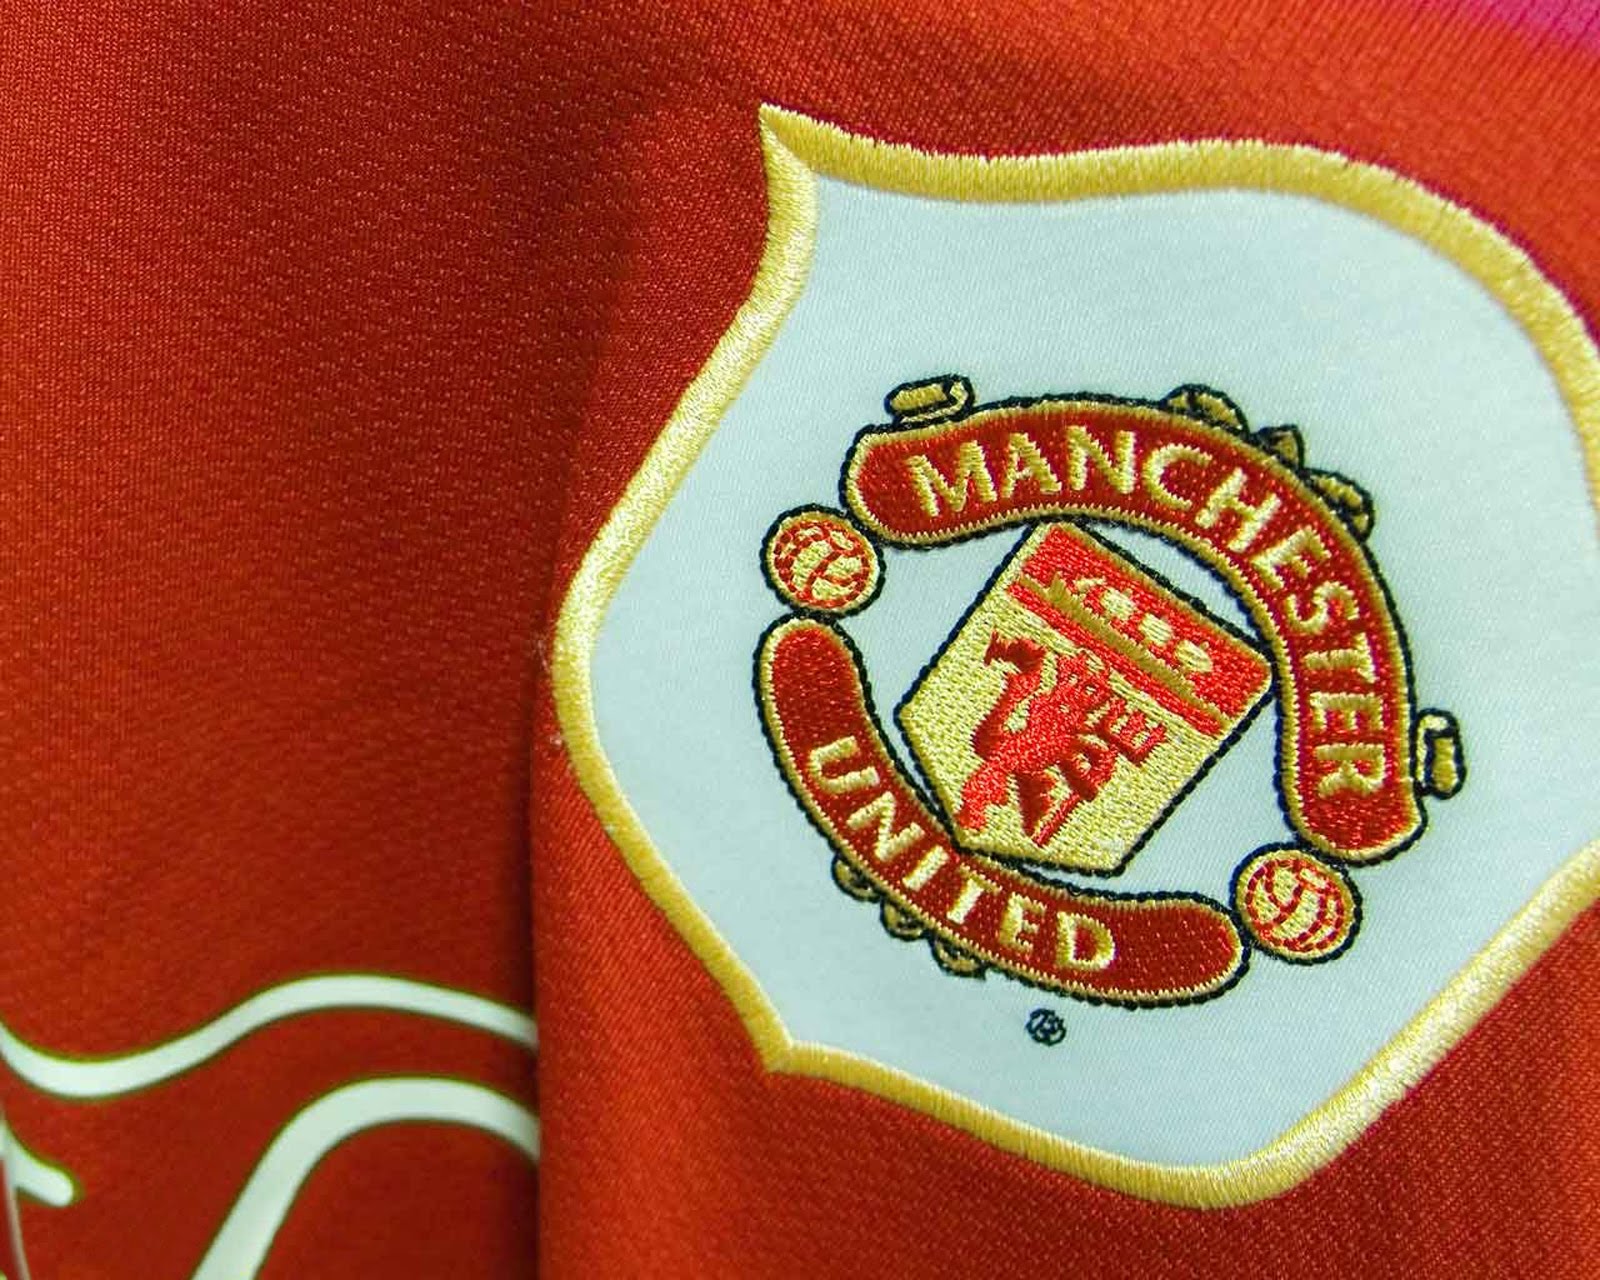 ... /manchester-united-logos-graphics-manchester-united-wallpaper.html